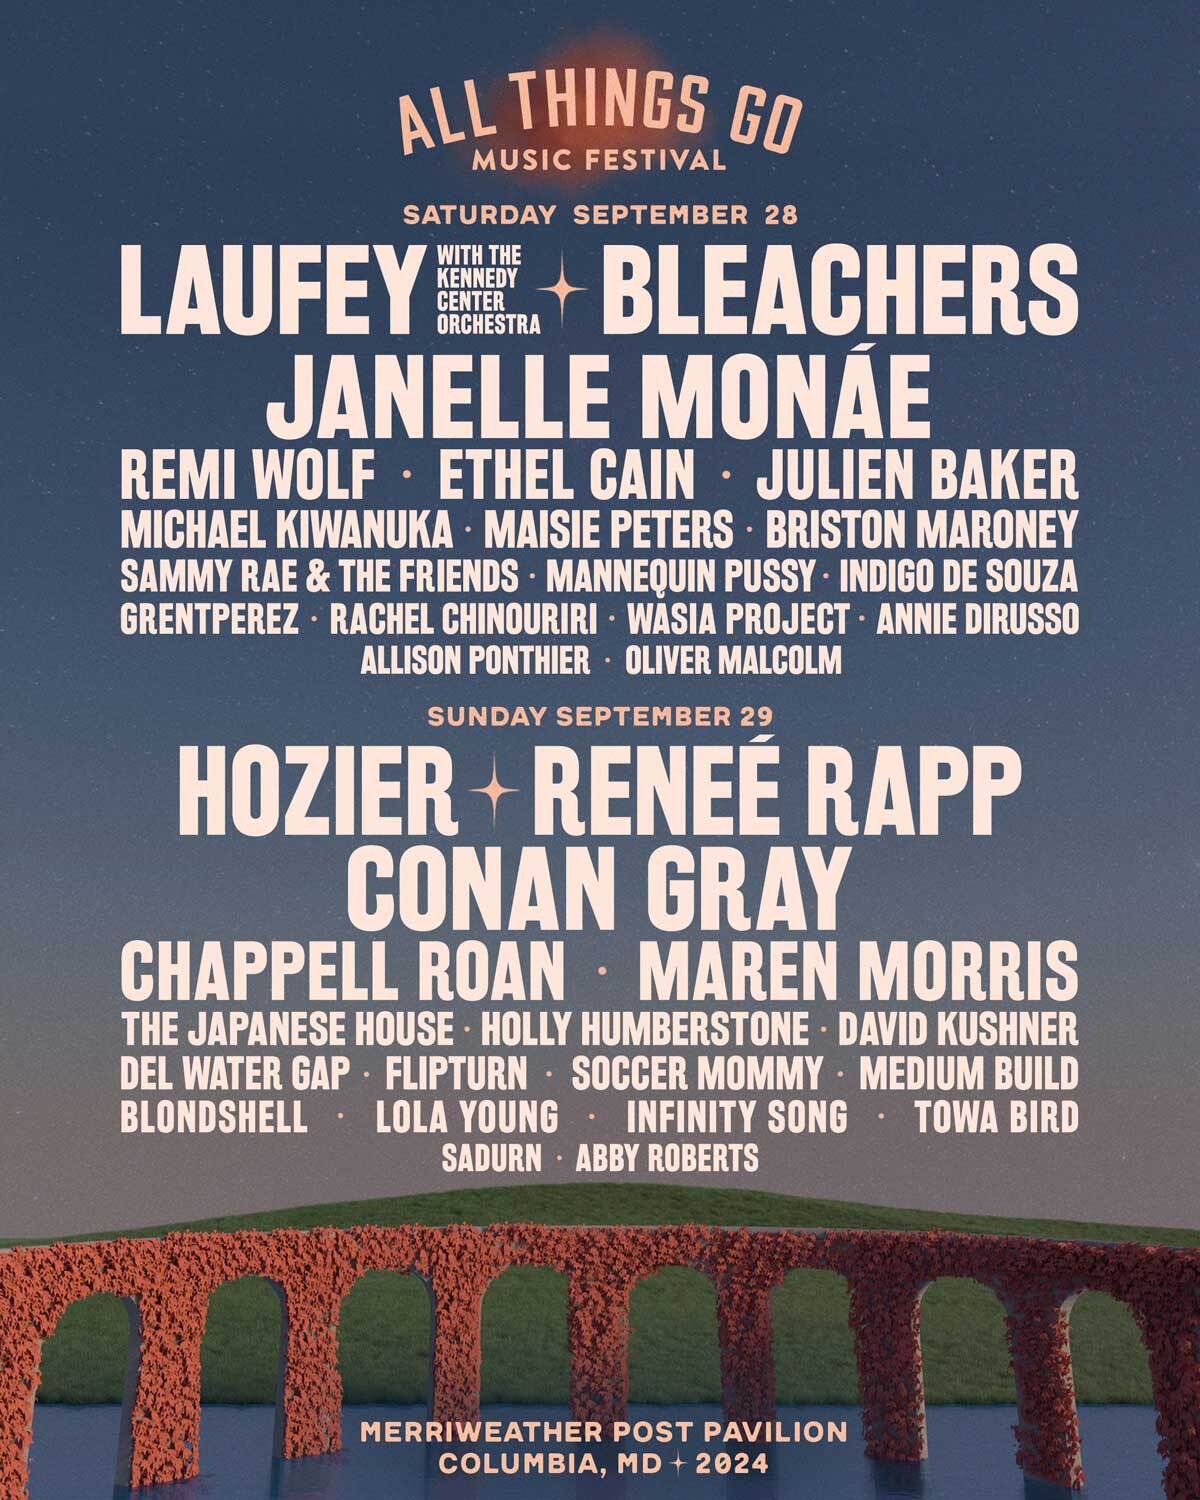 All Things Go Reveals 2024 Lineup with Hozier, Laufey, Reneé Rapp